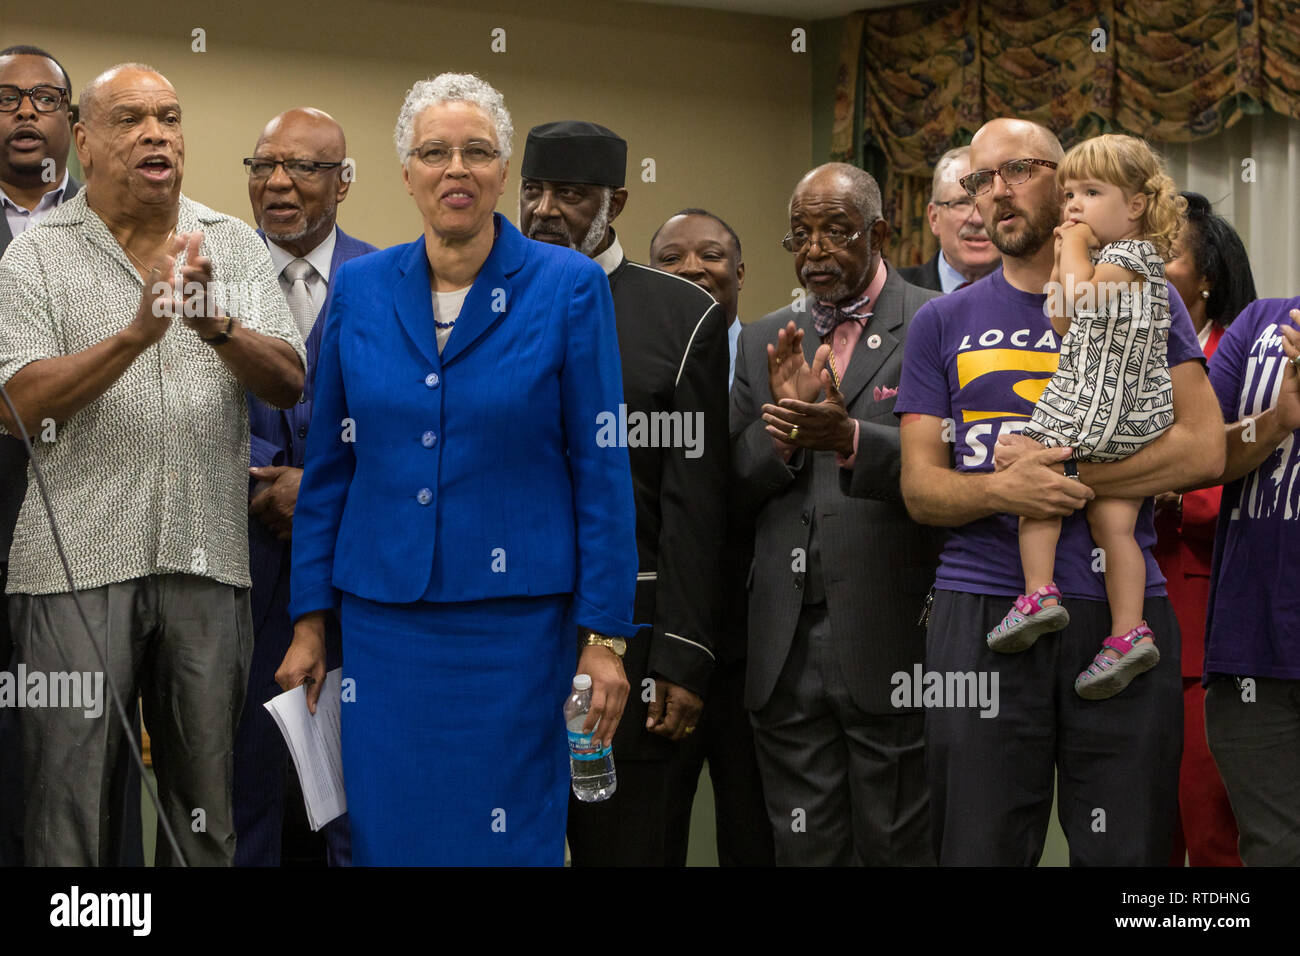 Toni preckwinkle hi-res stock photography and images - Alamy